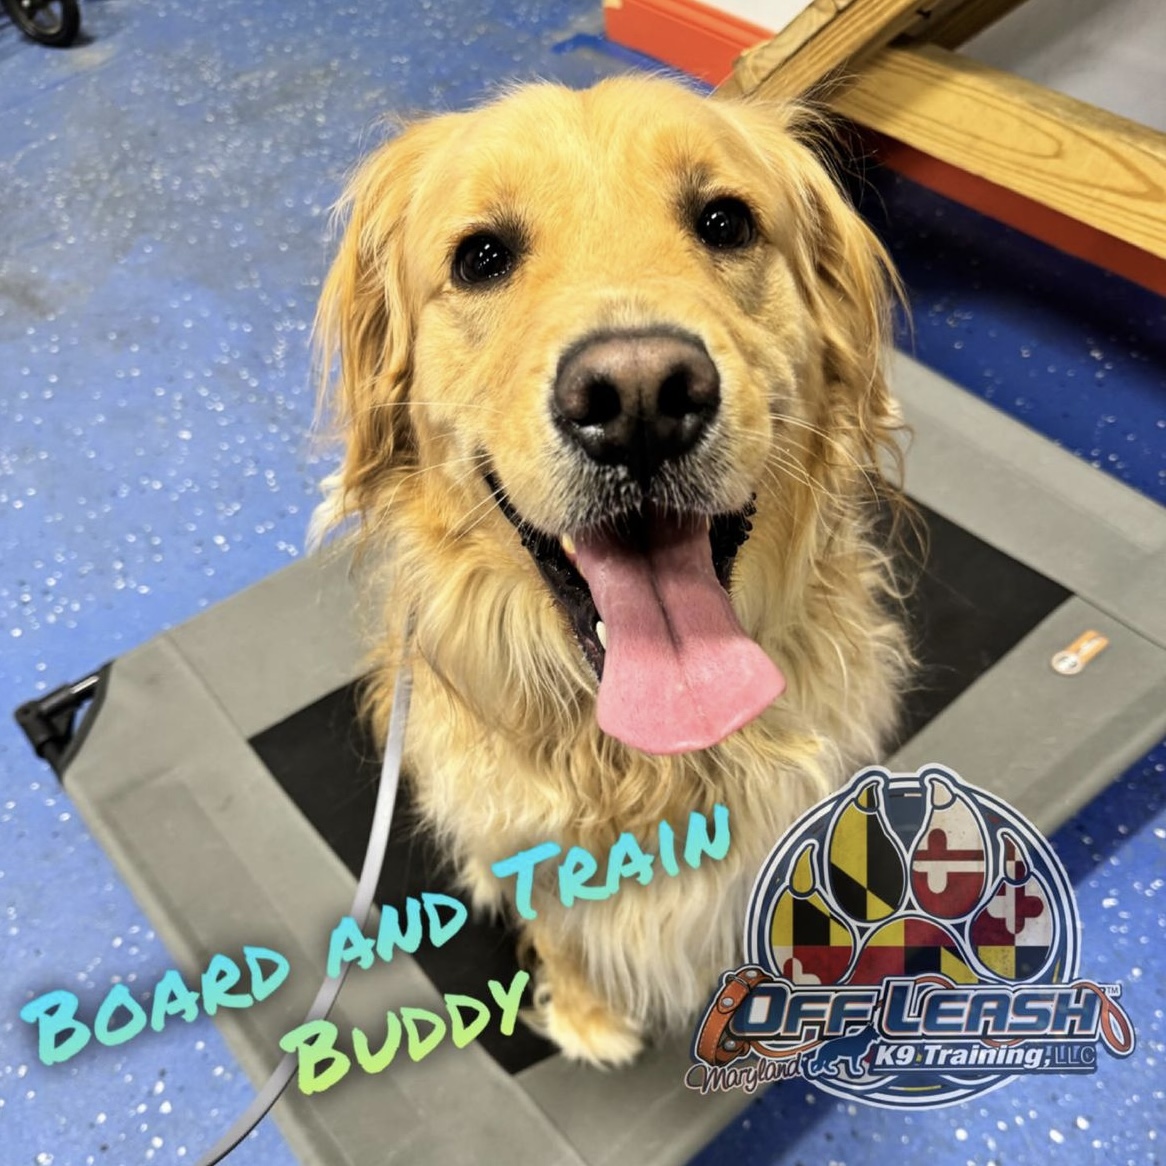 Dog named Buddy who completed our board and train program